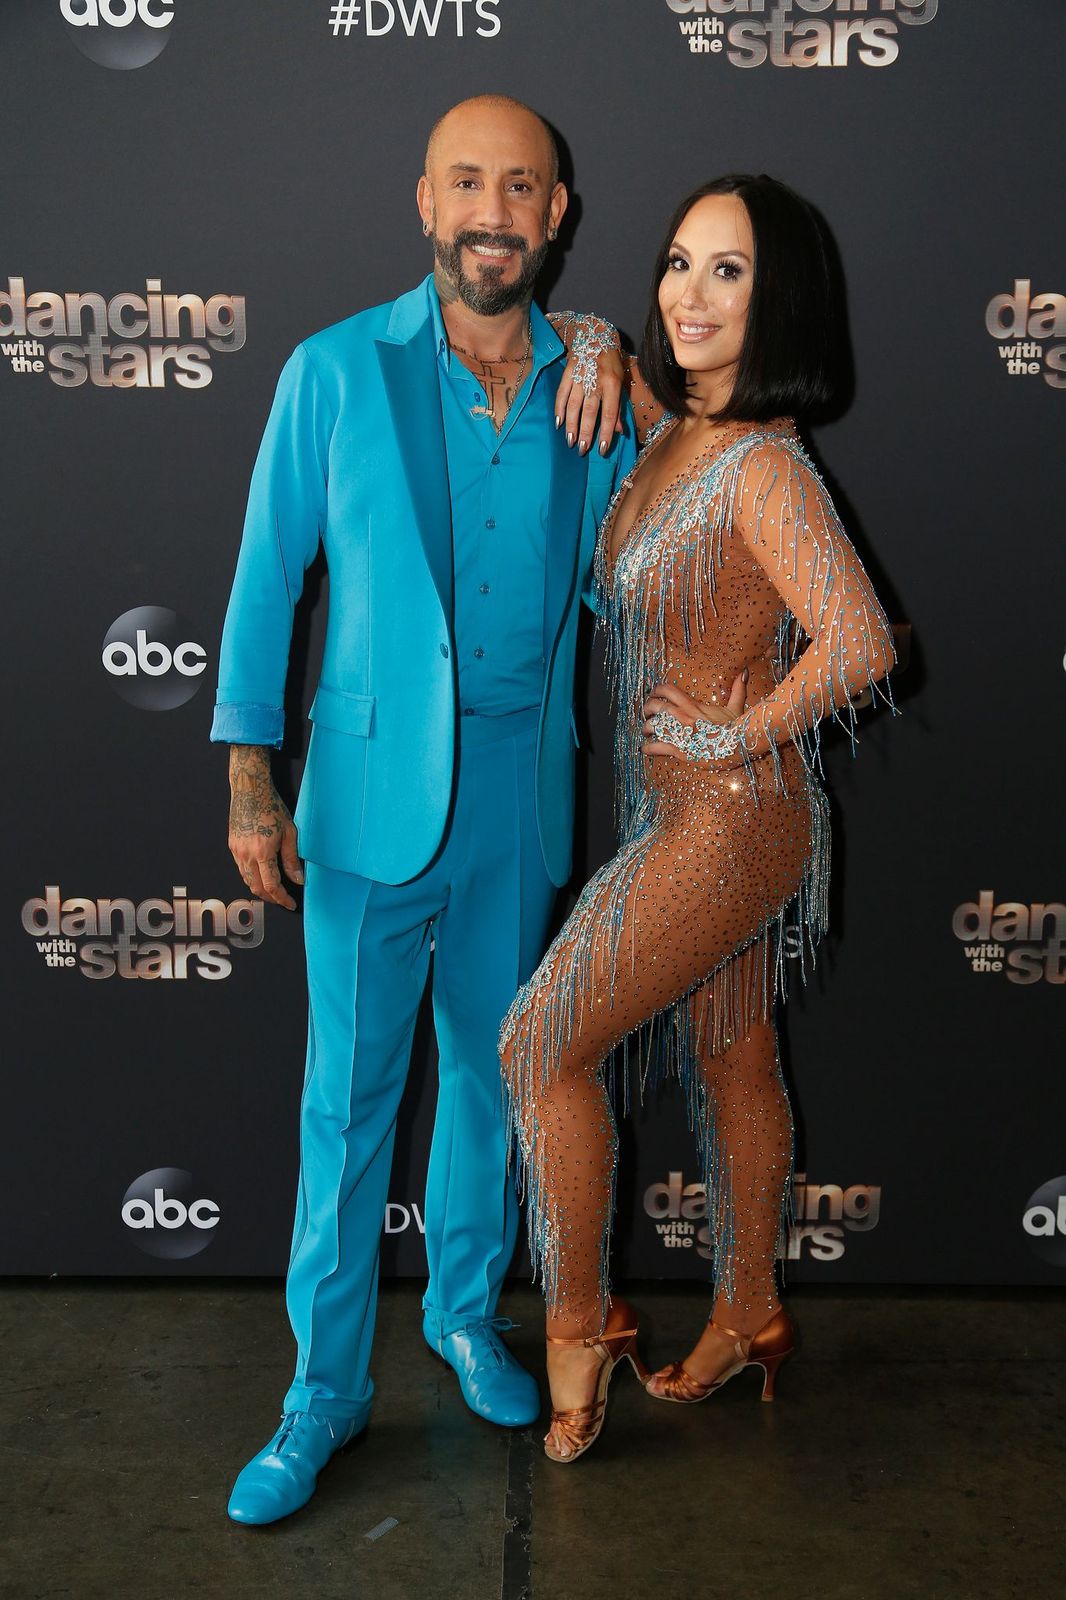 AJ McLean & Cheryl Burke at ABC's "Dancing With the Stars" - Season 29 - Season Premiere on September 14, 2020 | Photo: Getty Images